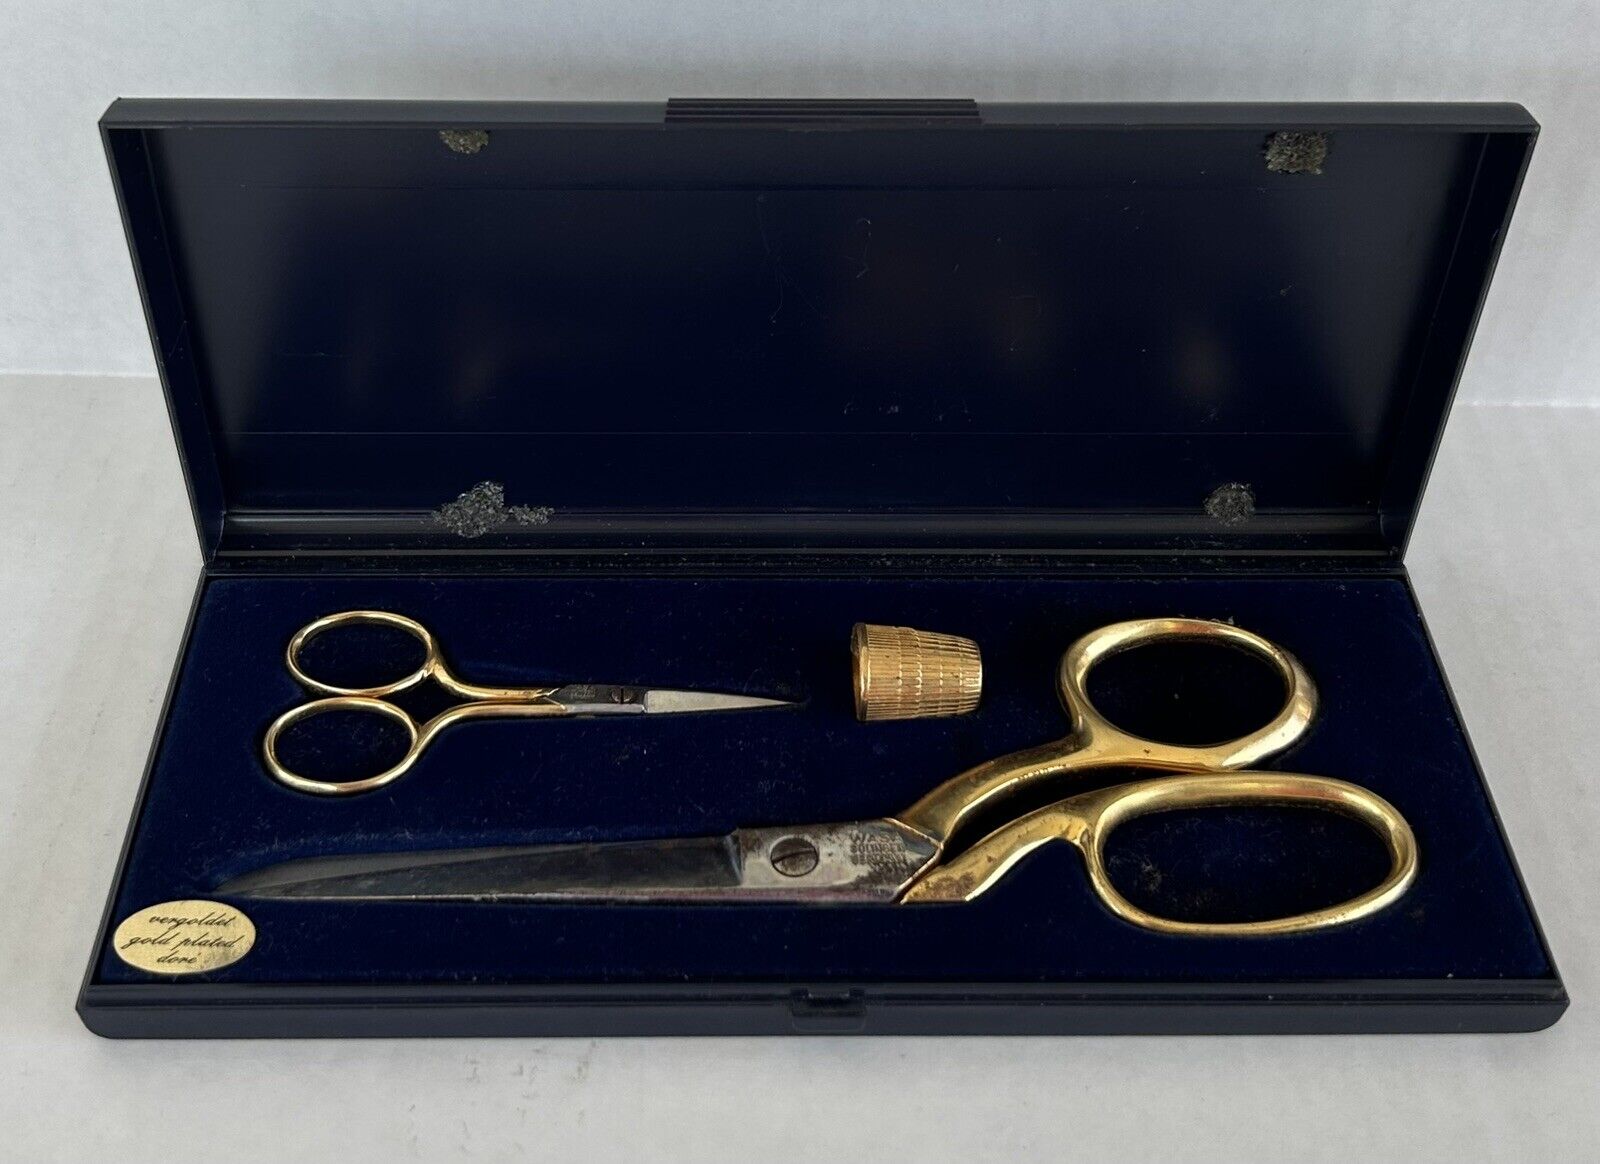 Vintage Sewing Embroidery Scissors Set WASA Gold Plated Solingen West Germany